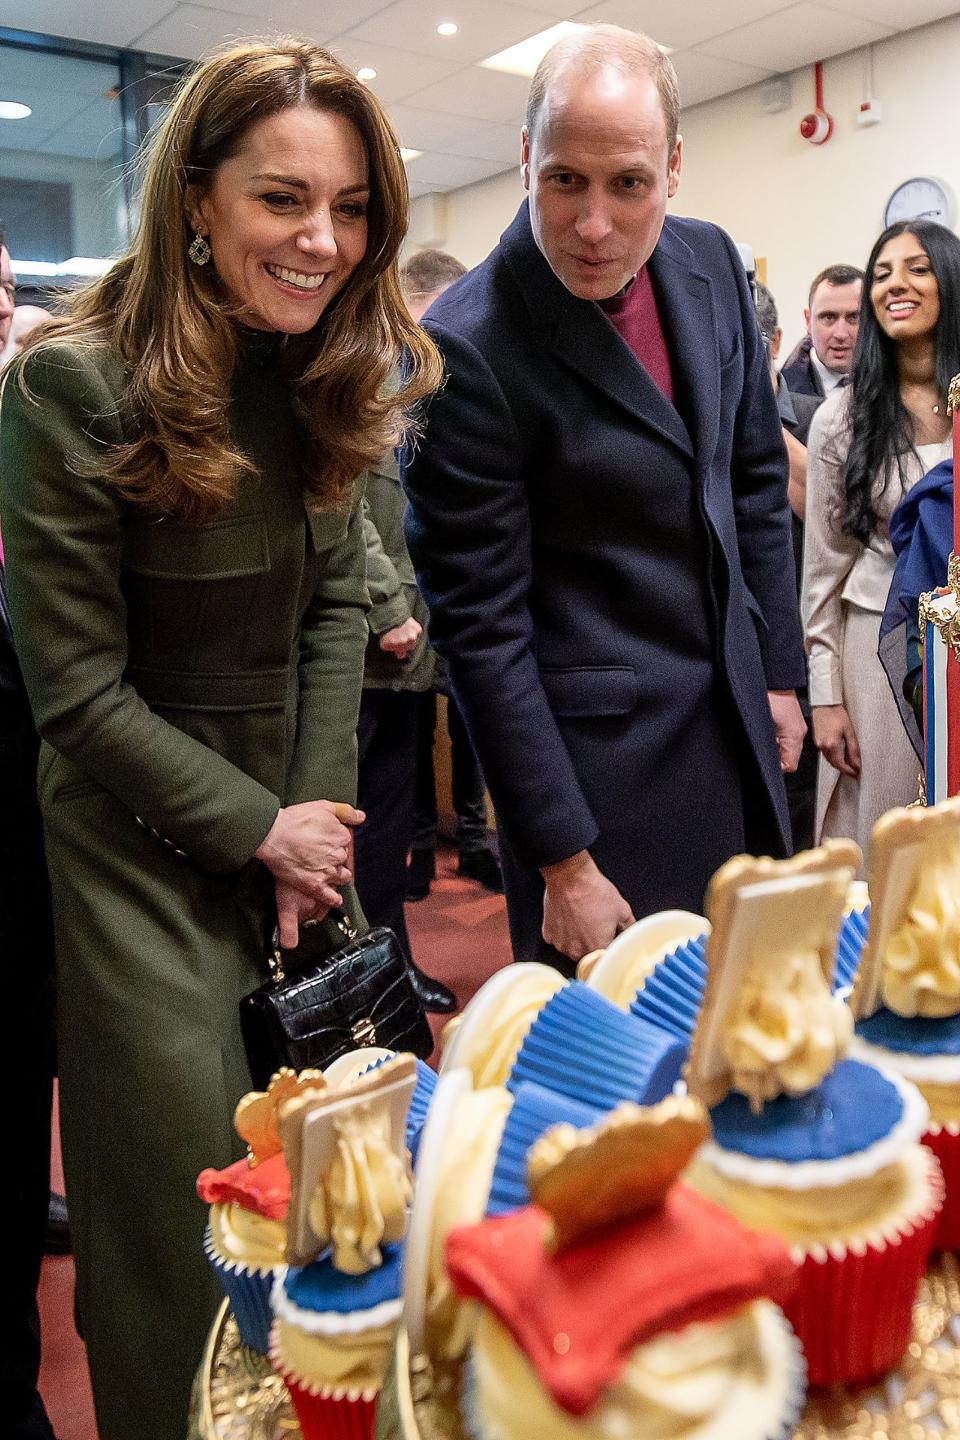 Britain's Prince William, Duke of Cambridge and Britain's Catherine, Duchess of Cambridge react during their visit to the Khidmat Centre in Bradford on January 15, 2020, to learn about the activities and workshops offered by the centre. (Photo by Charlotte Graham / POOL / AFP) (Photo by CHARLOTTE GRAHAM/POOL/AFP via Getty Images)